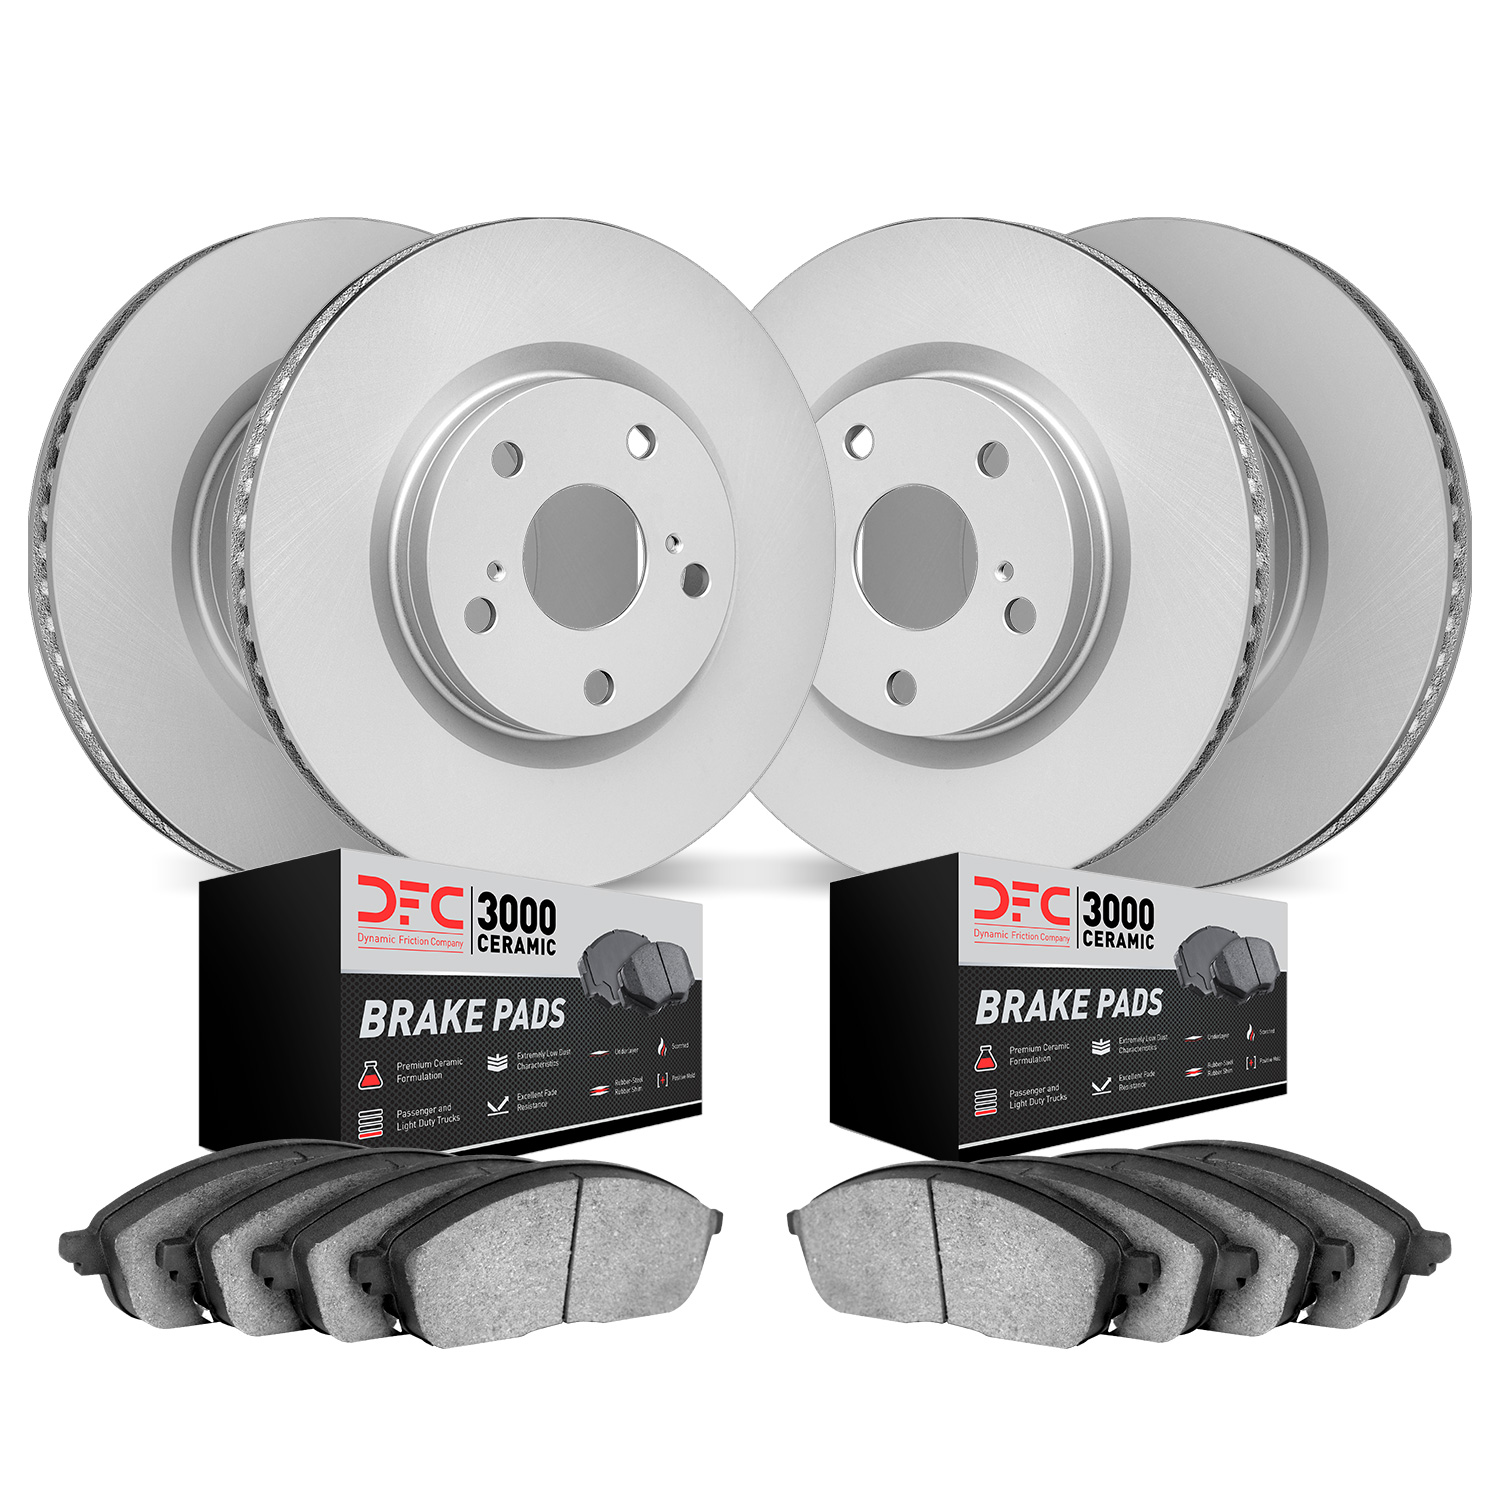 4304-67020 Geospec Brake Rotors with 3000-Series Ceramic Brake Pads Kit, 2002-2006 Infiniti/Nissan, Position: Front and Rear